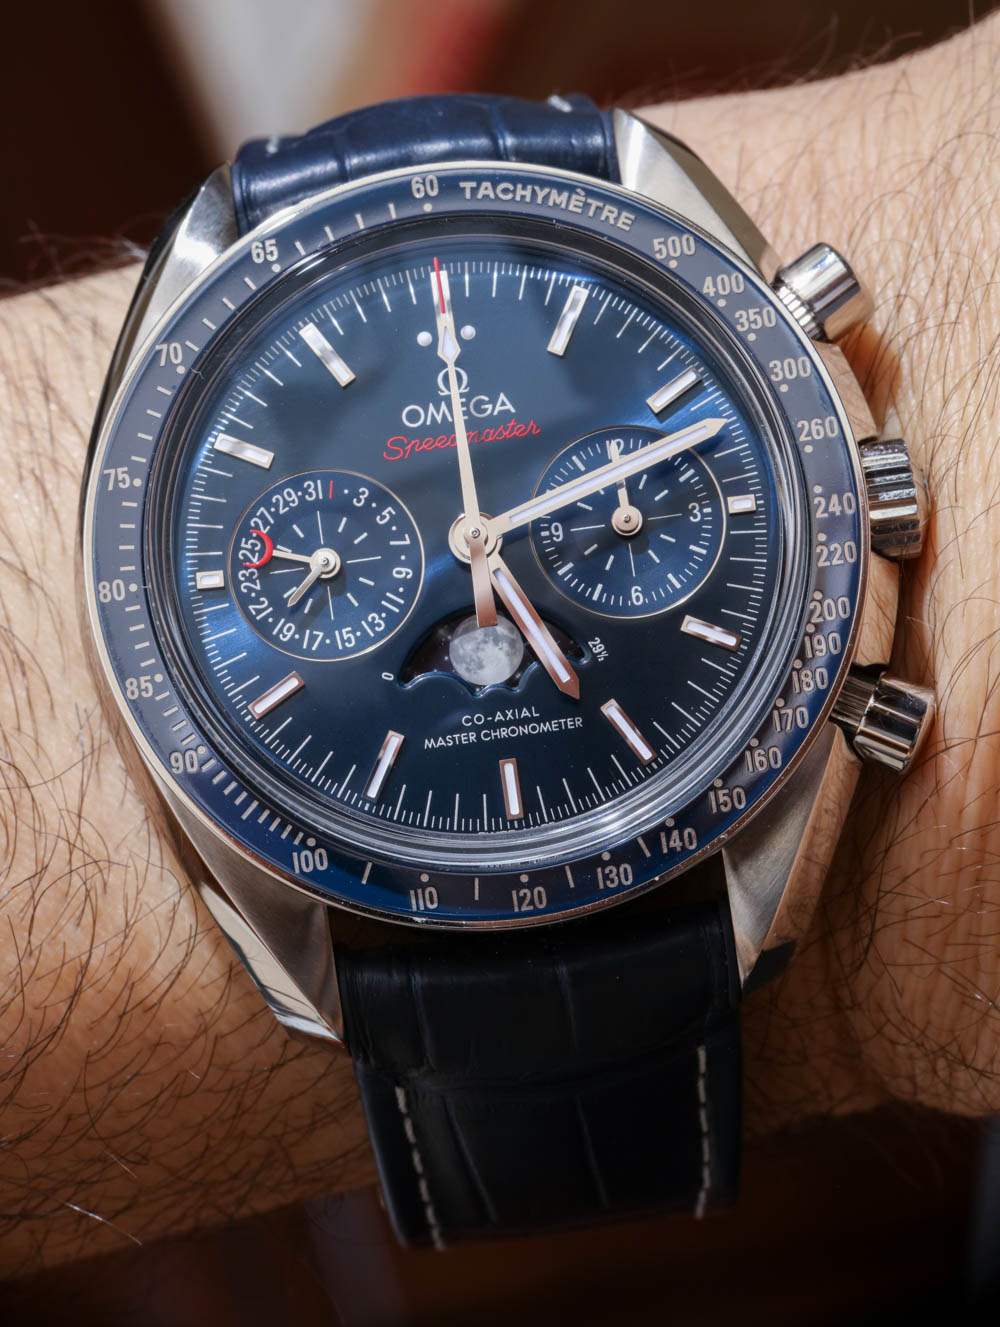 Omega-Speedmaster-Moonwatch-Co-Axial-Master-Chronometer-Moonphase-Chronograph-10